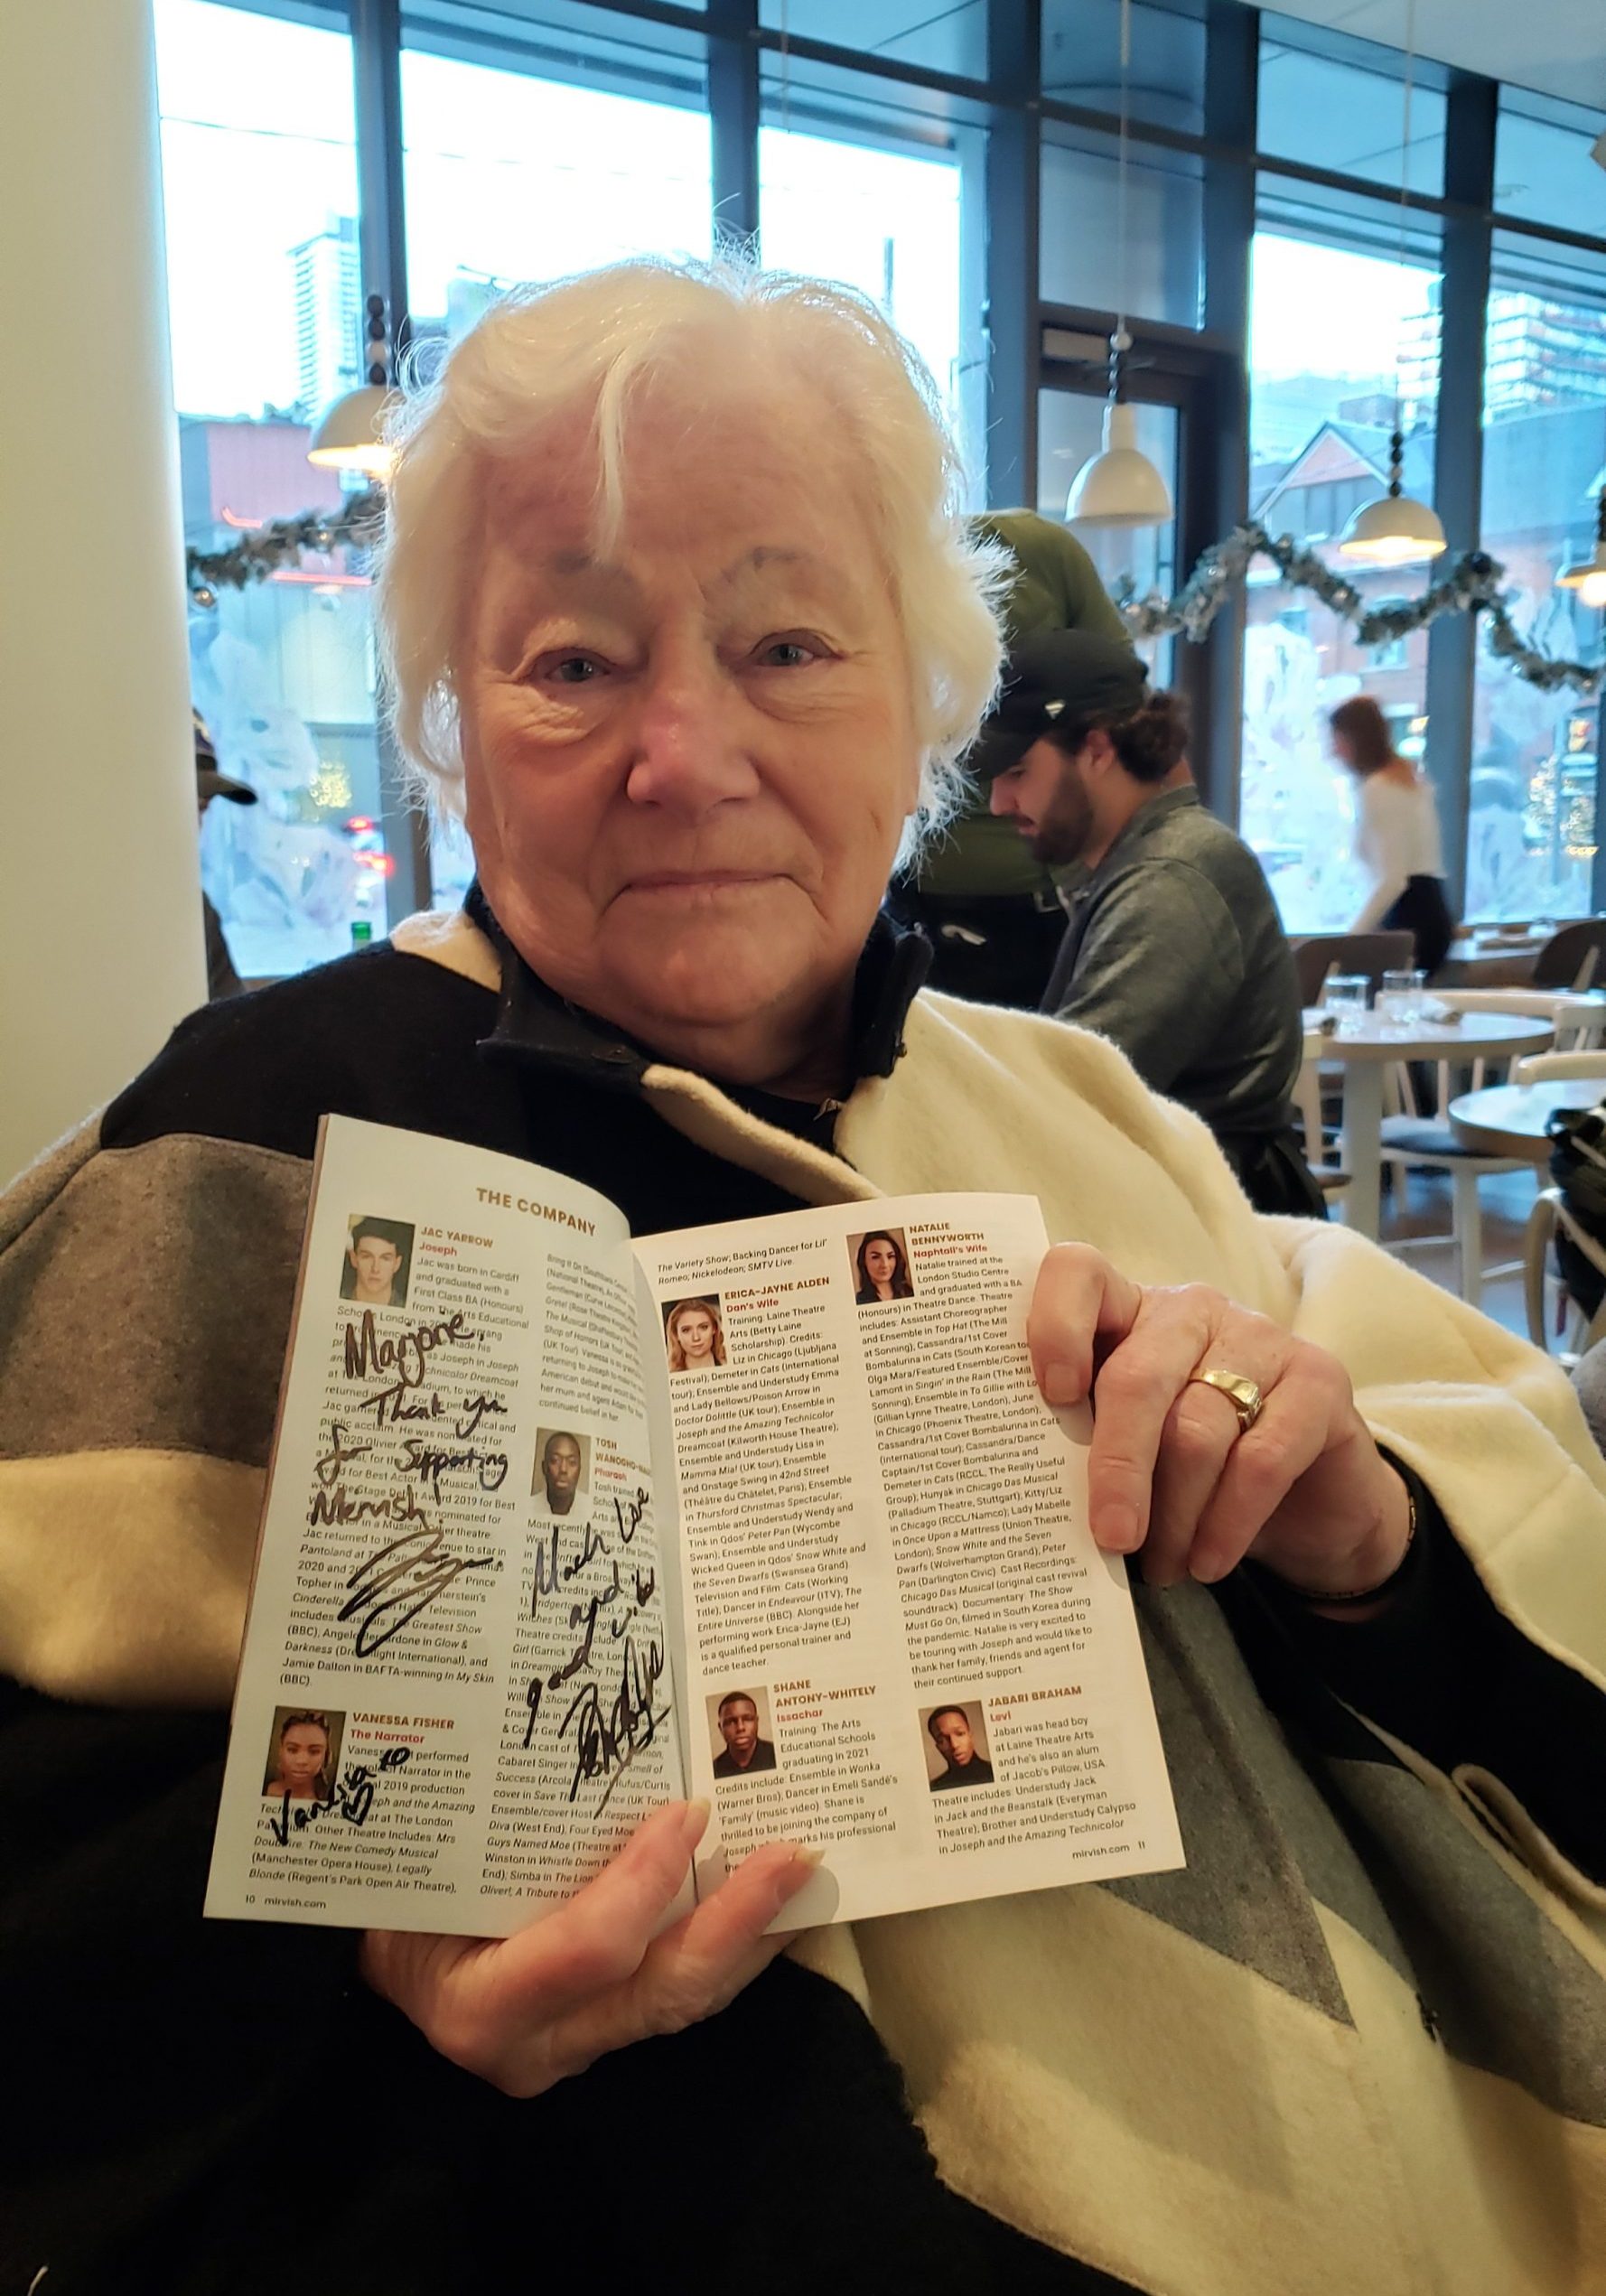 Marjorie signed on the program book of the Amazing Technicolour Dreamcoat at the Princess of Wales Theatre.